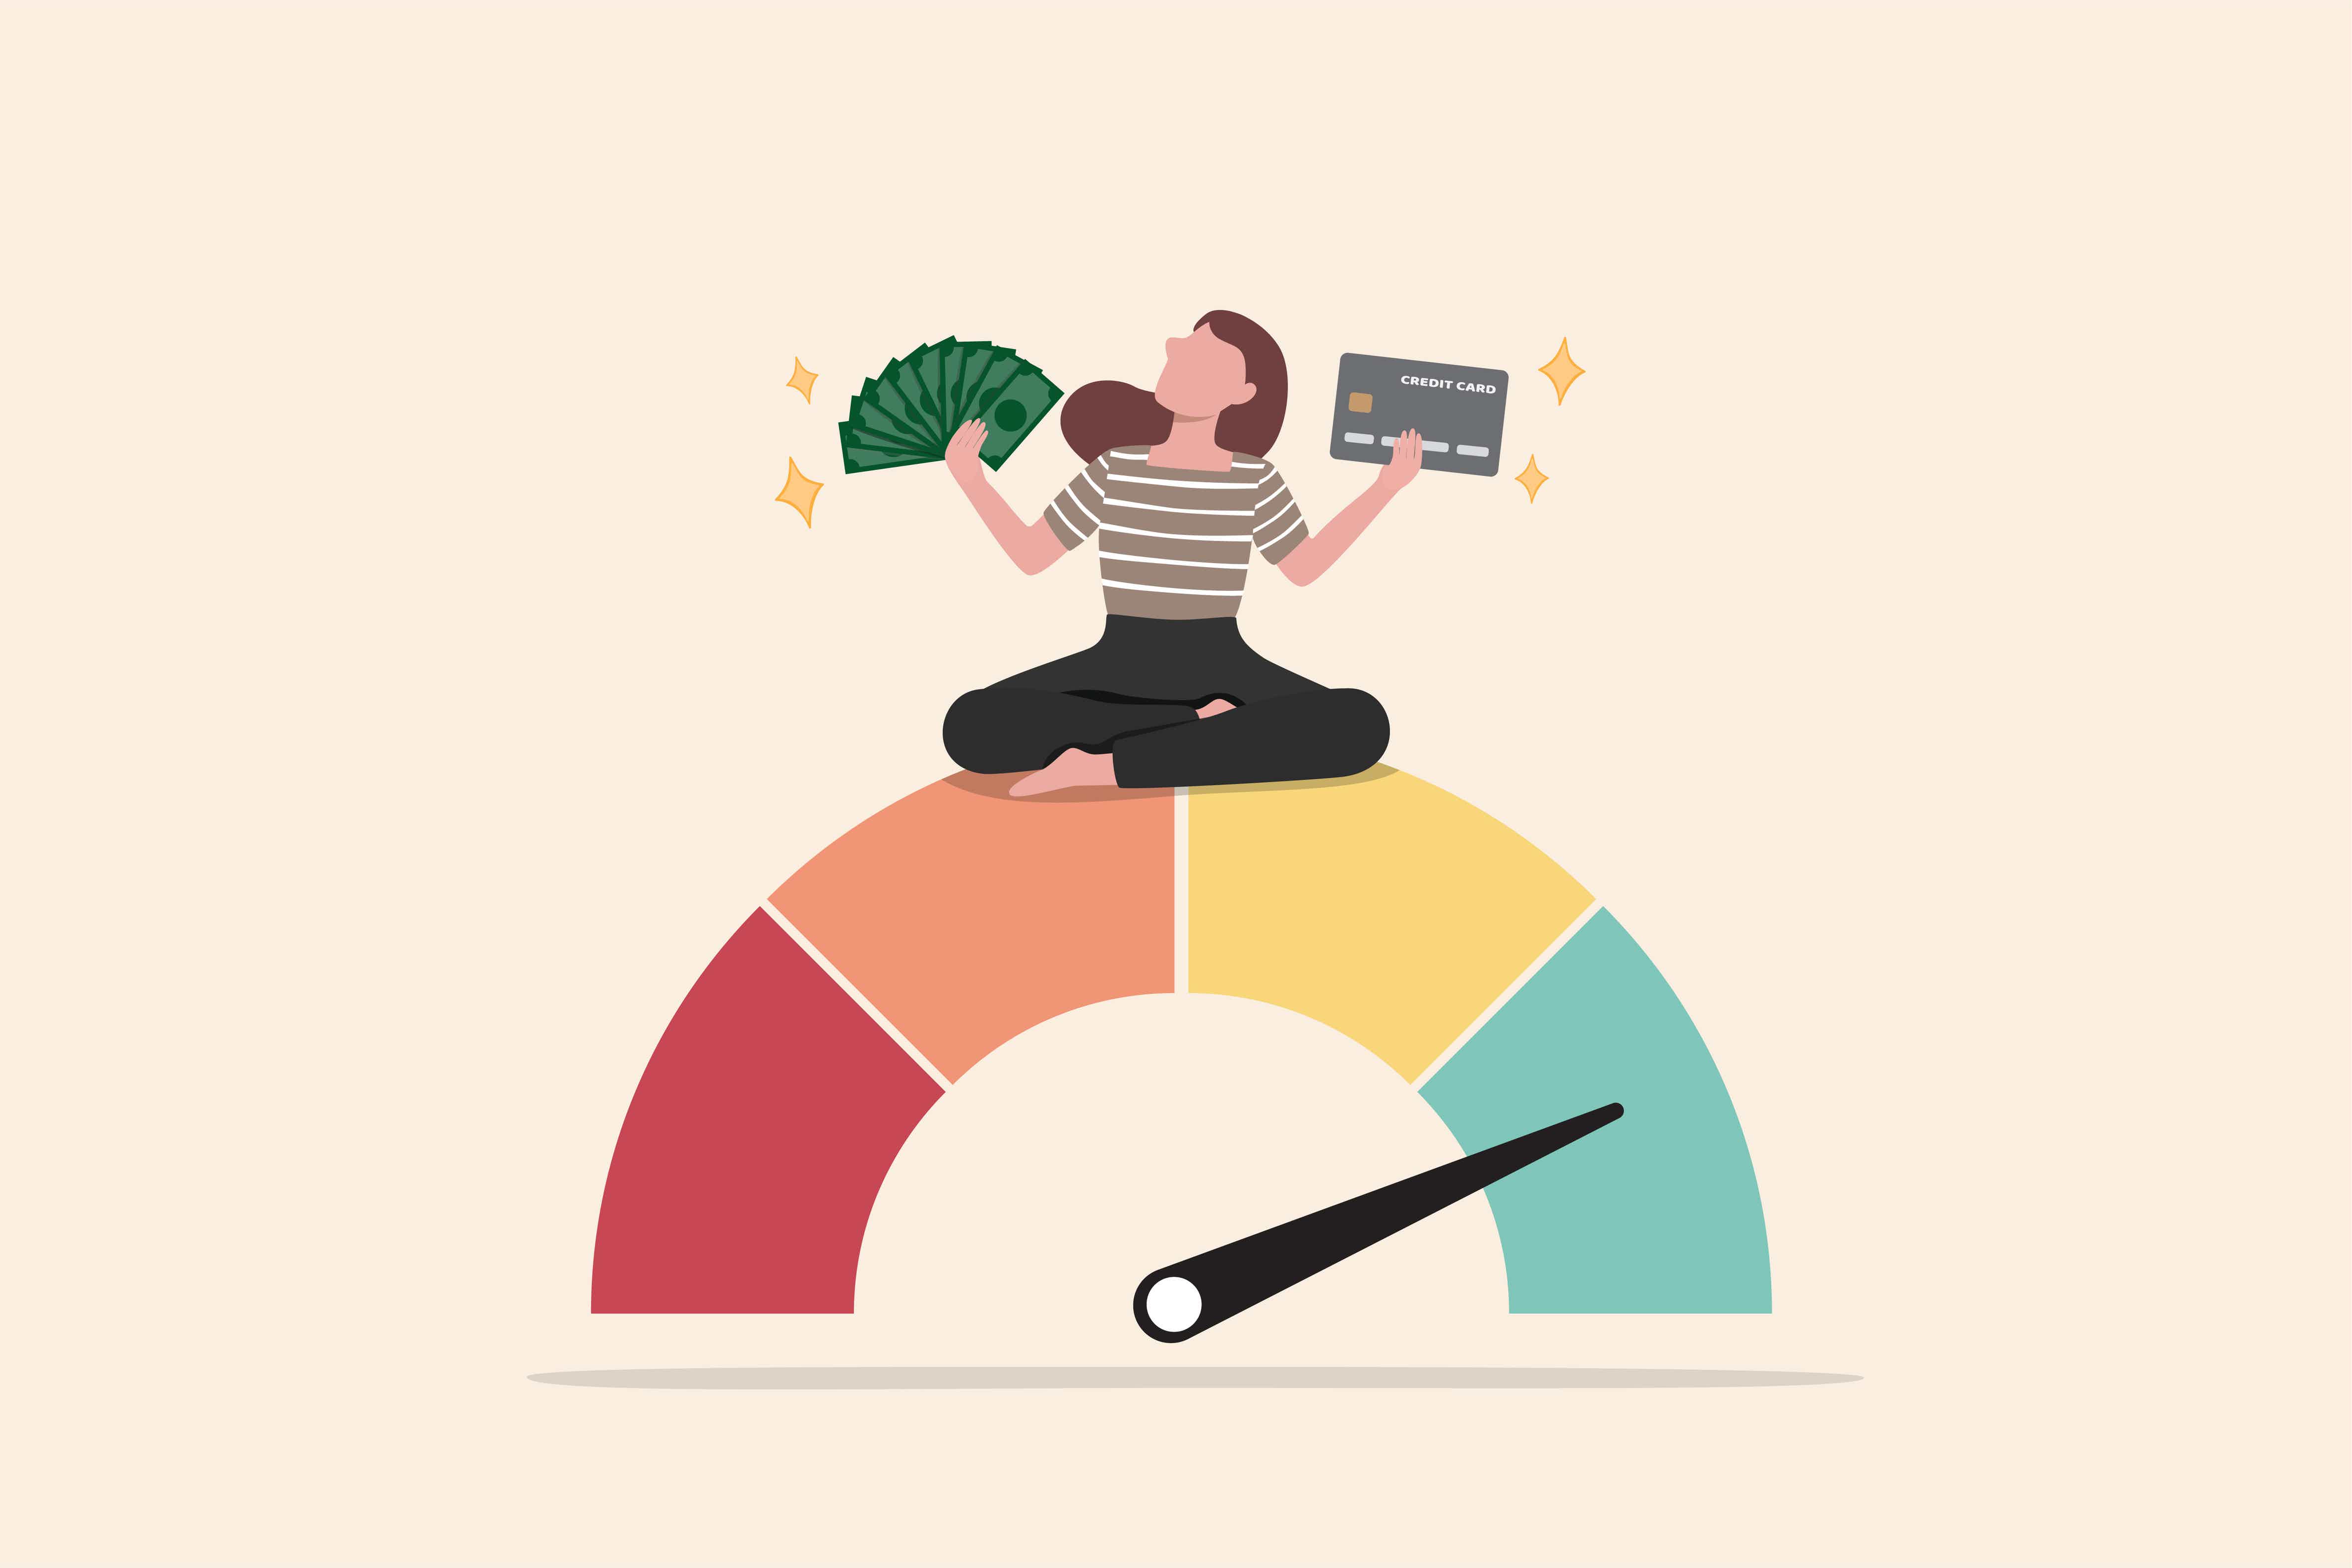 illustration of a person on top of a credit score meter holding money and a credit card